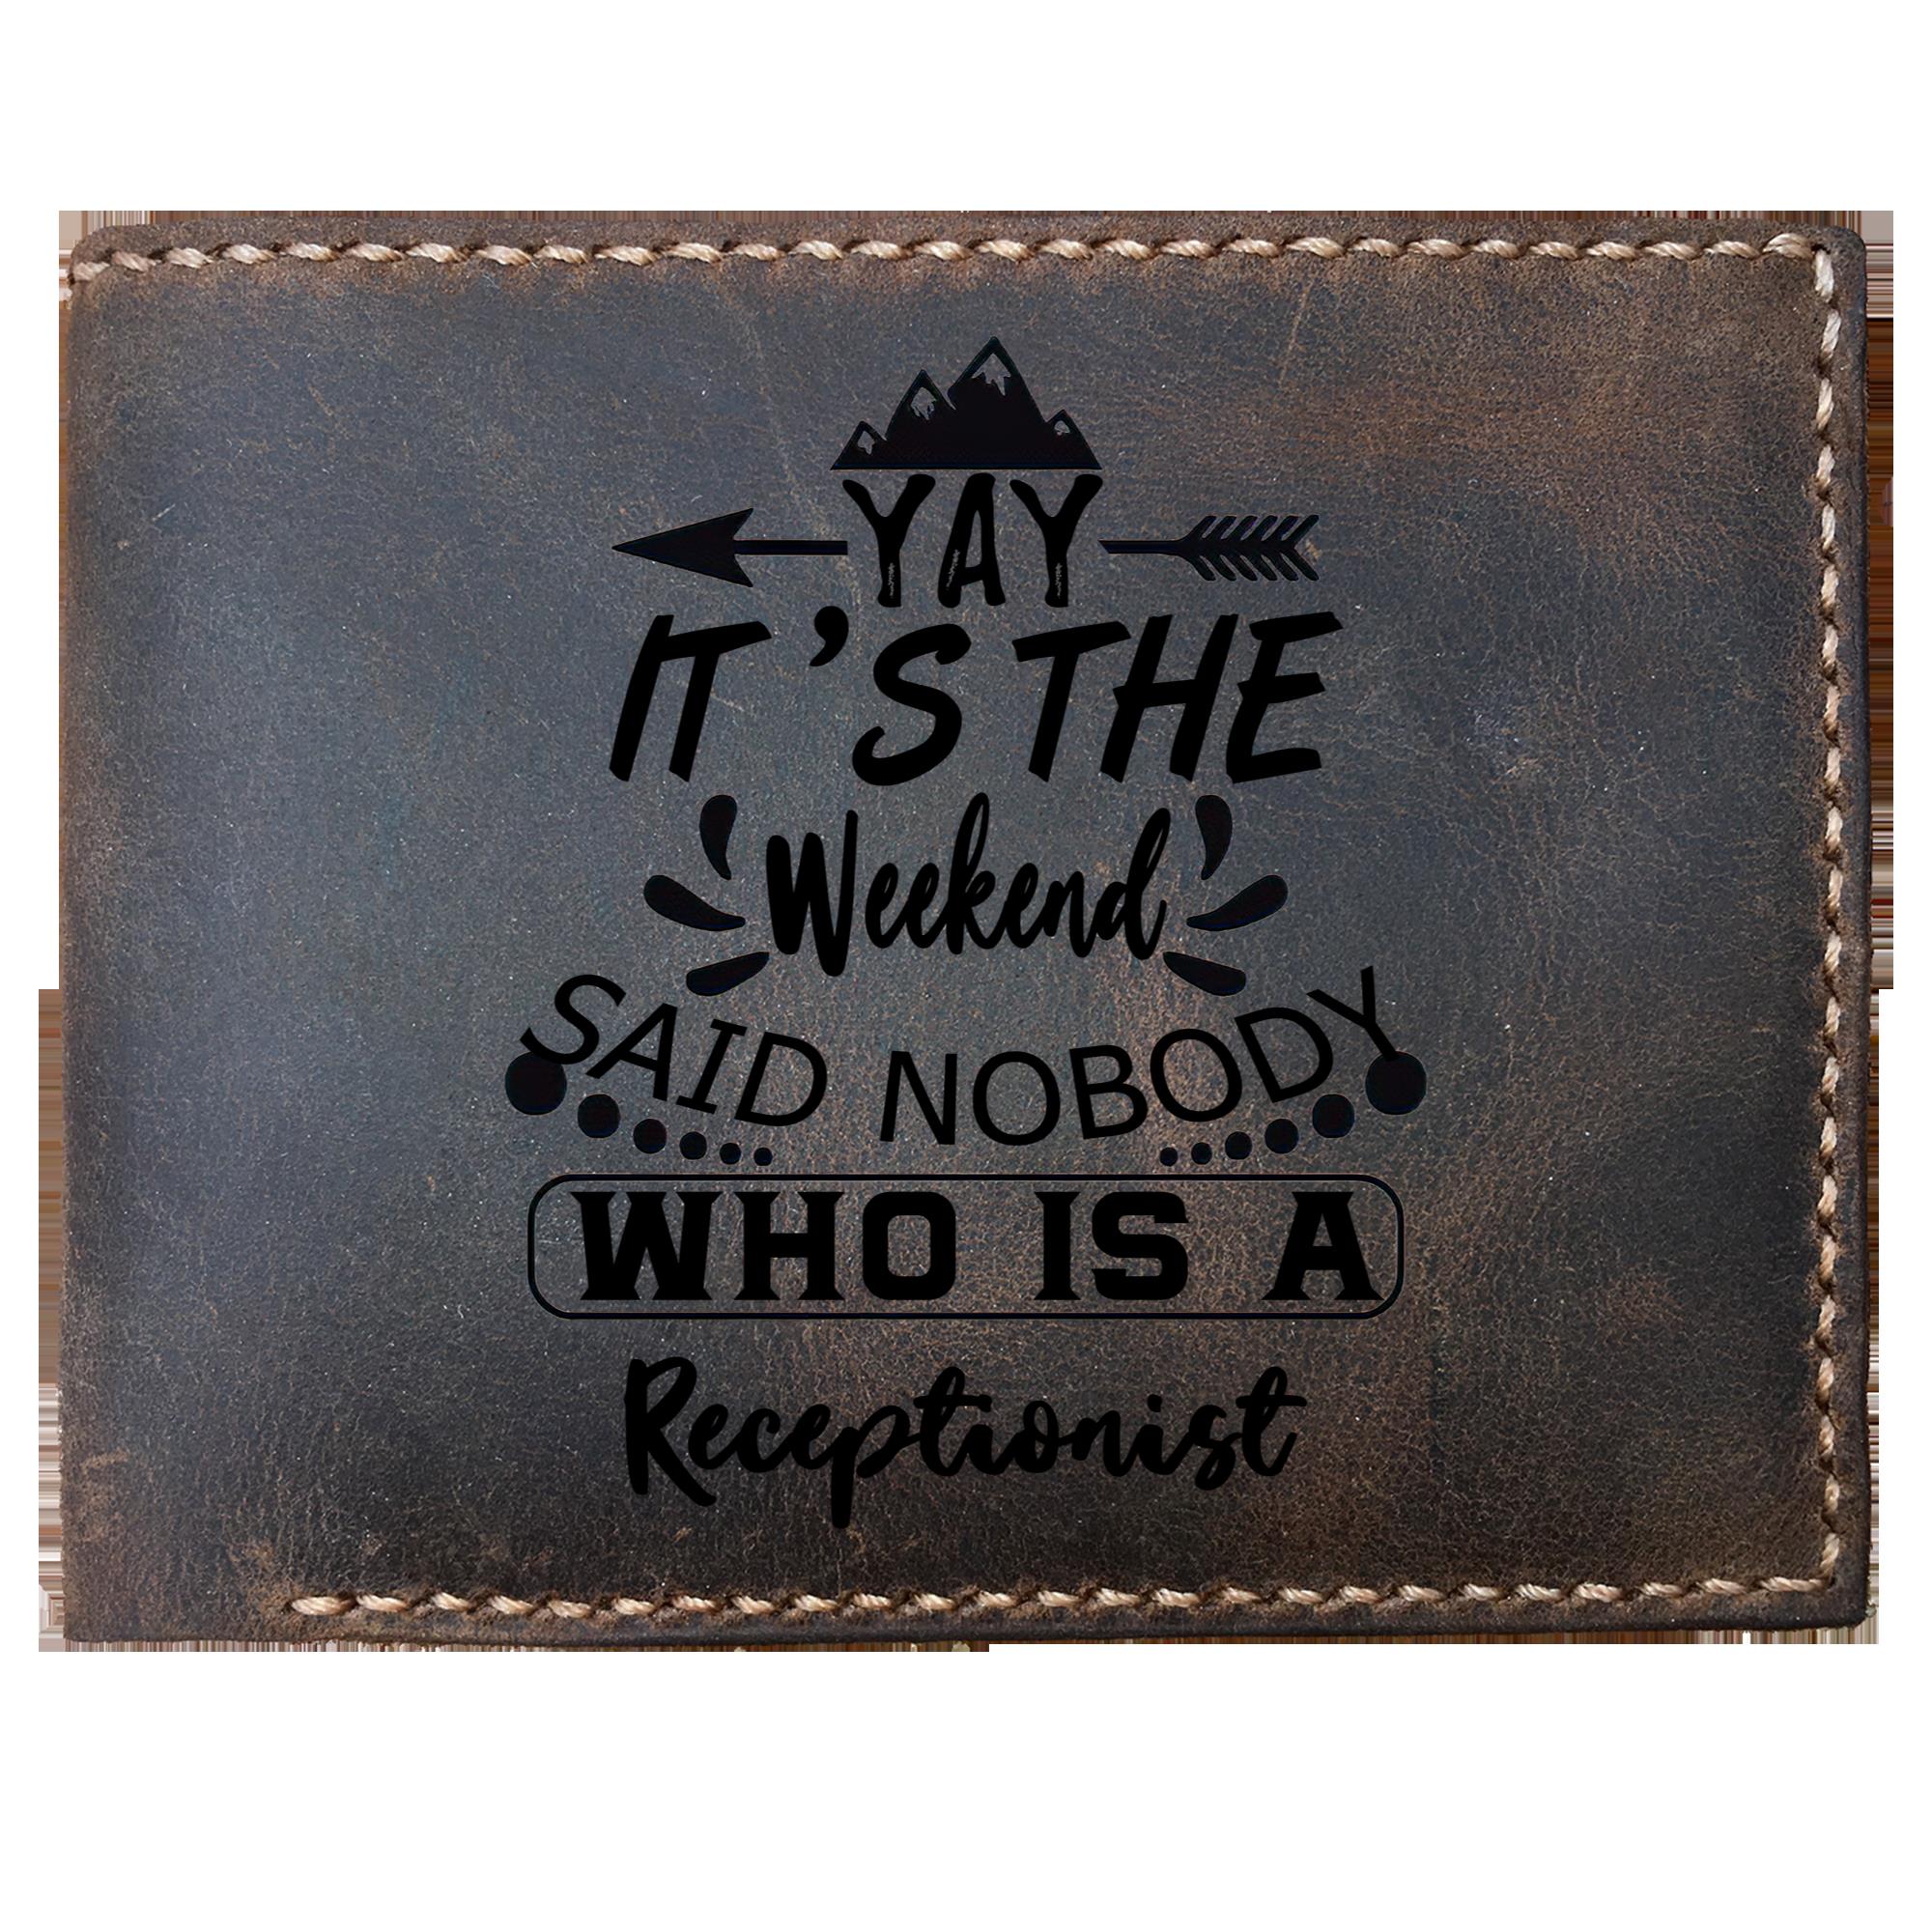 Skitongifts Funny Custom Laser Engraved Bifold Leather Wallet For Men, It's The Weekend Said Nobody Who Is A Receptionist, Father's Day Gifts